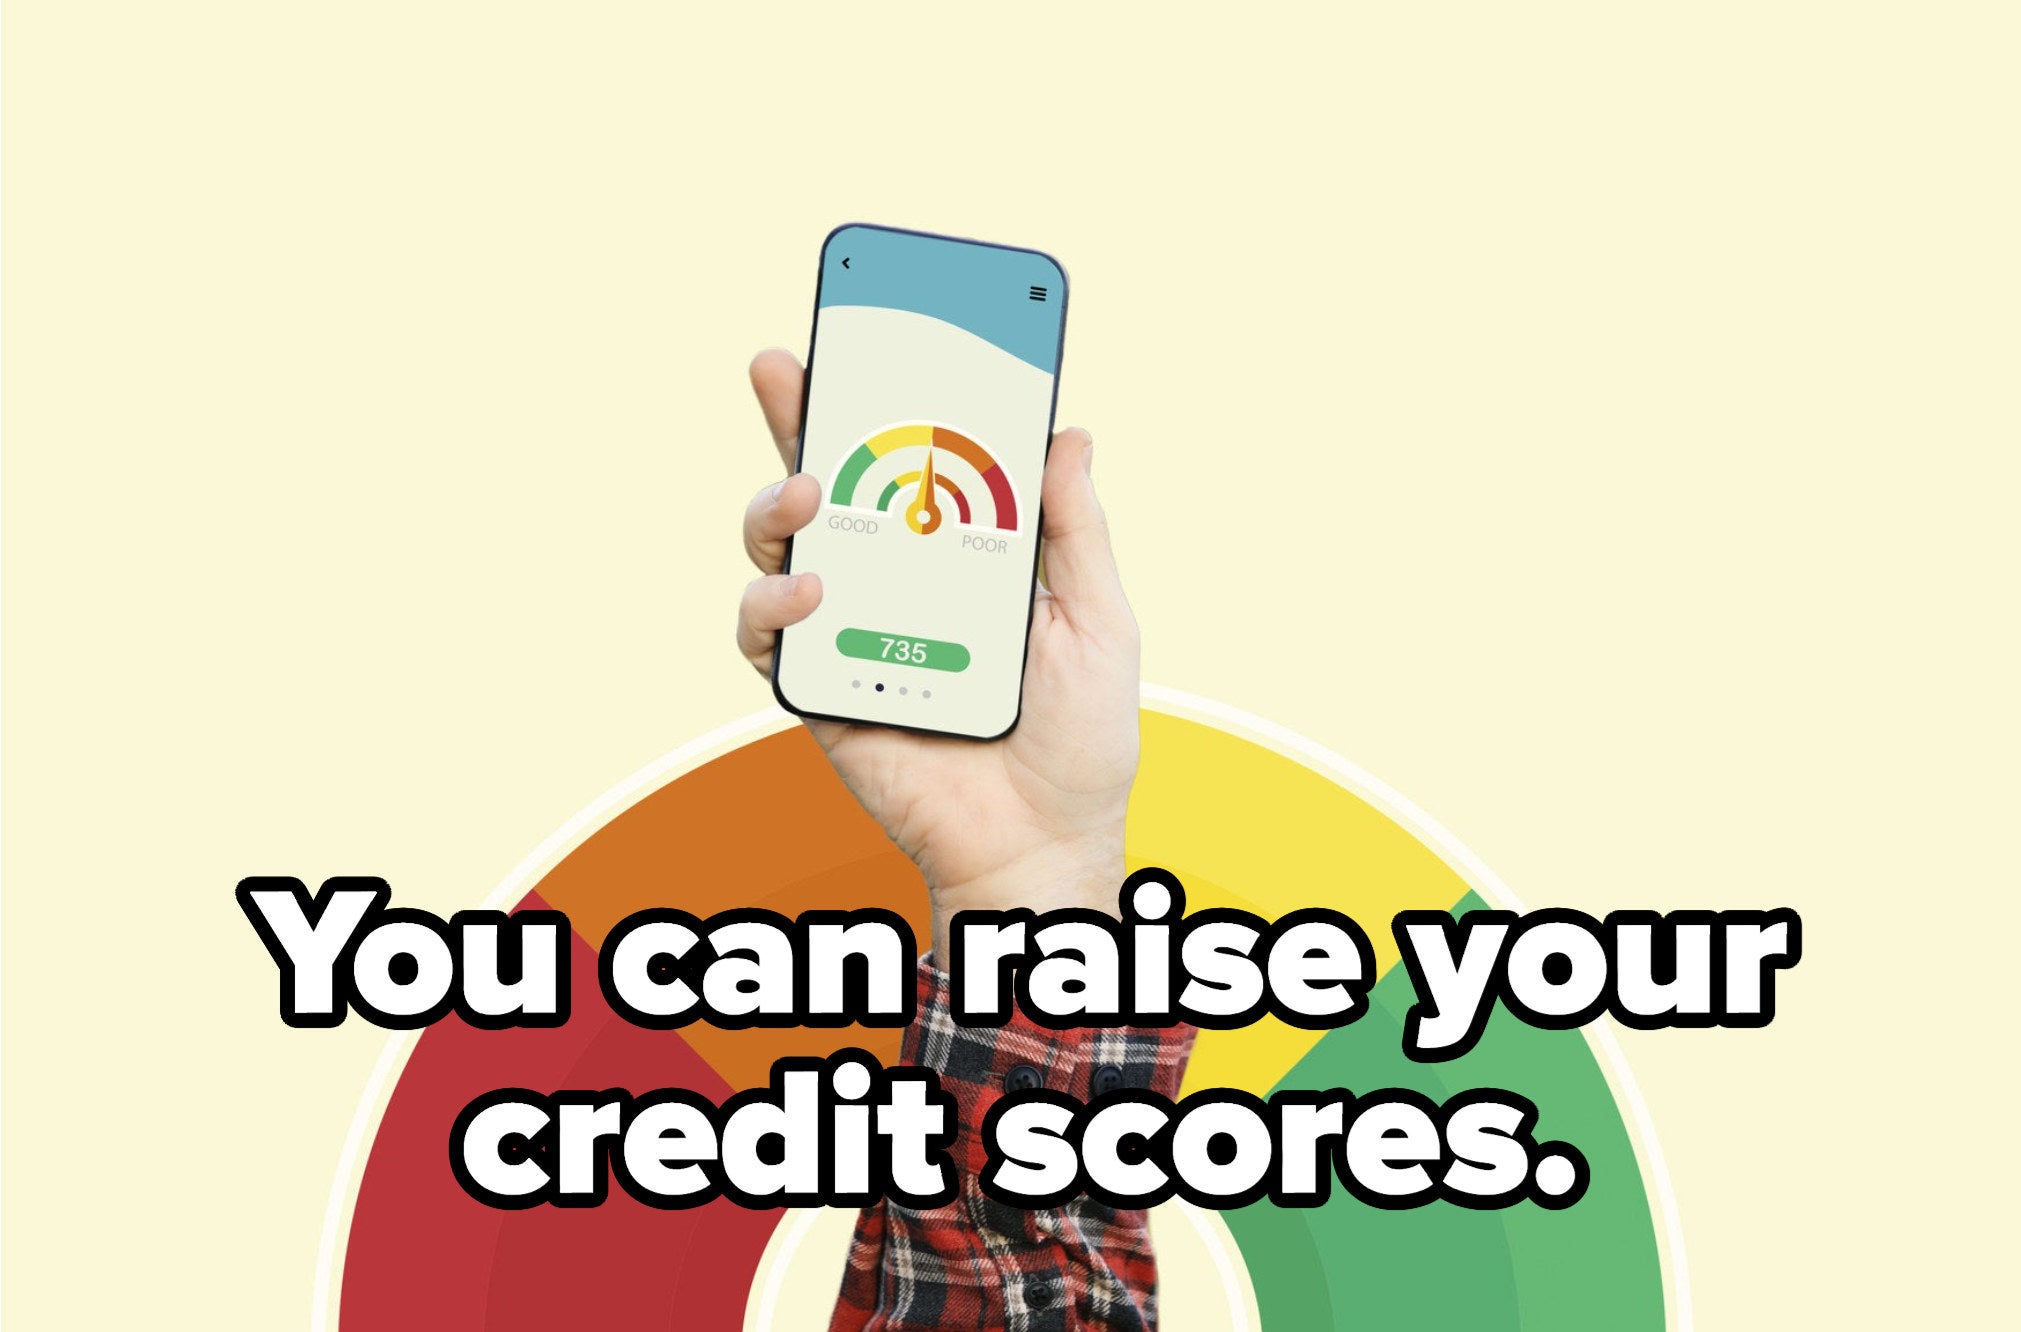 Hand holding a smartphone showing a credit score of 735